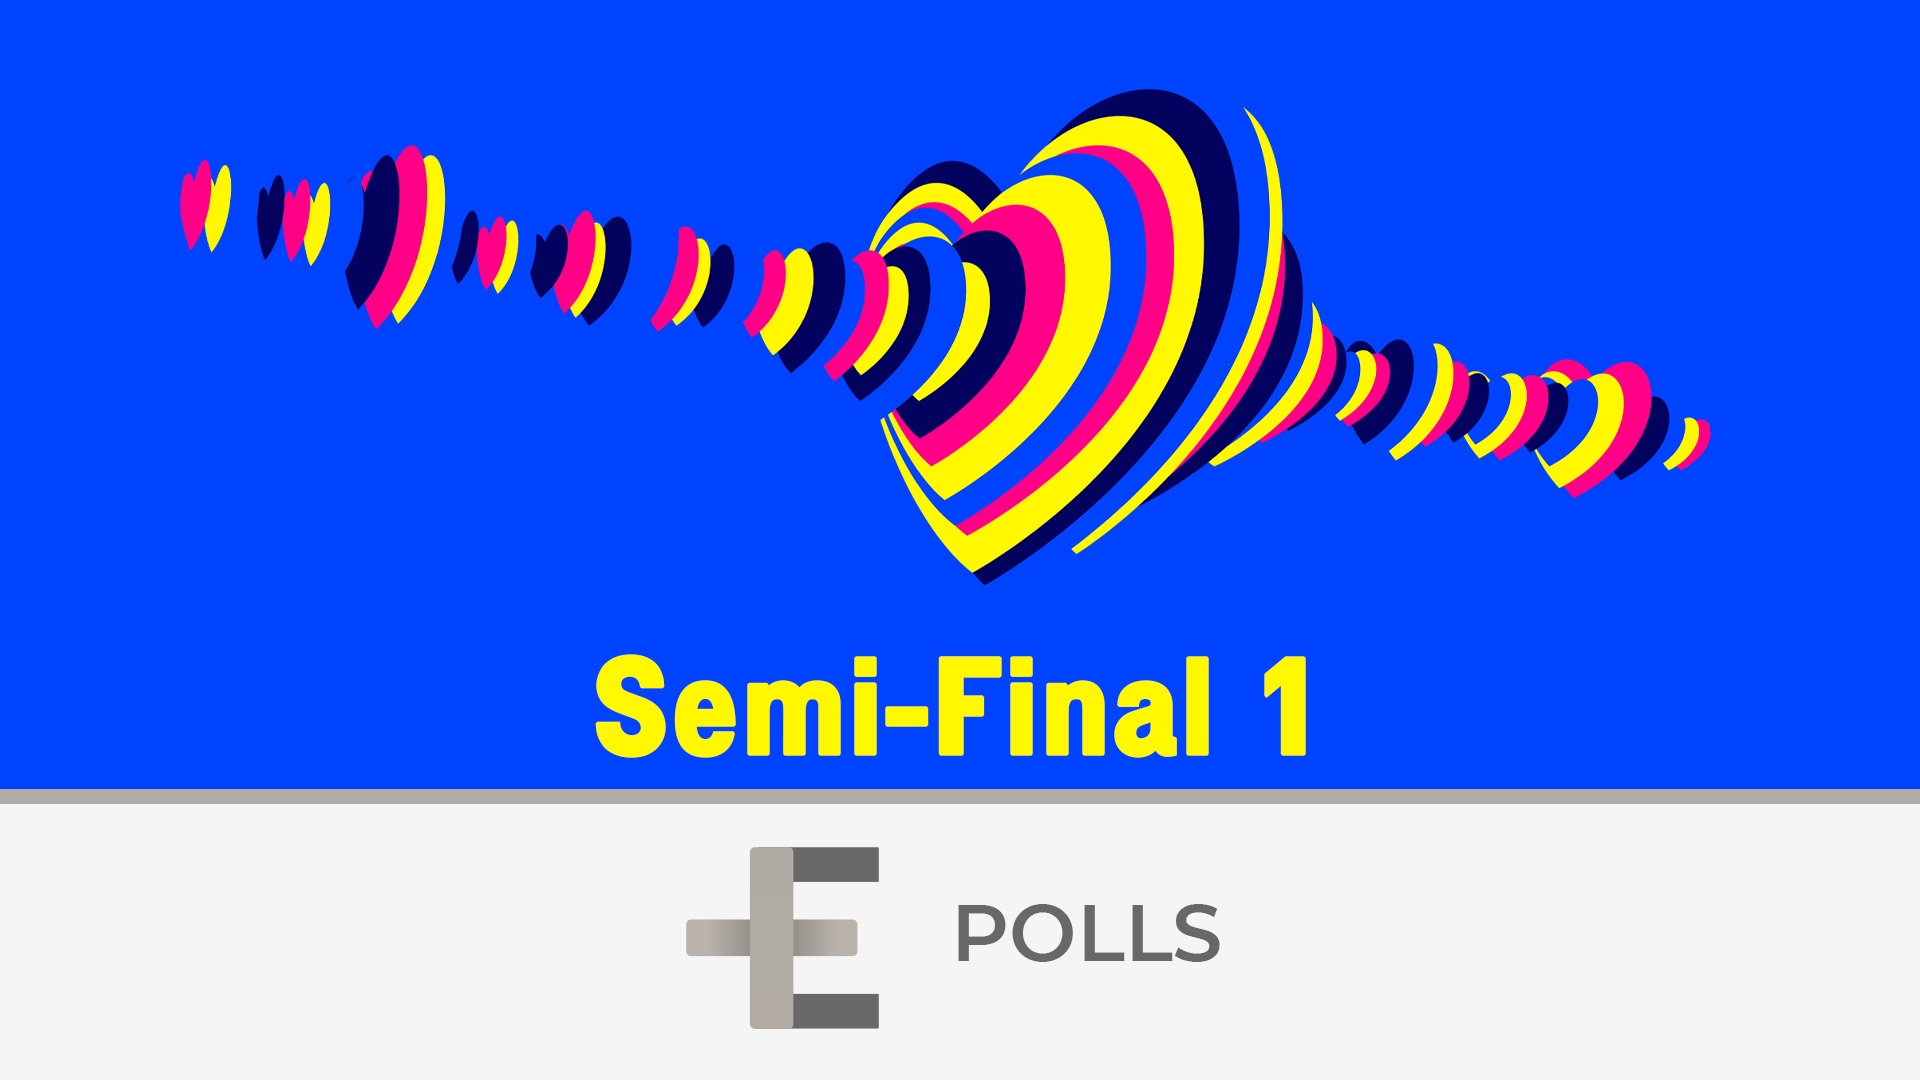 Poll: Who should qualify from the Eurovision 2023 Semi-Final 1?